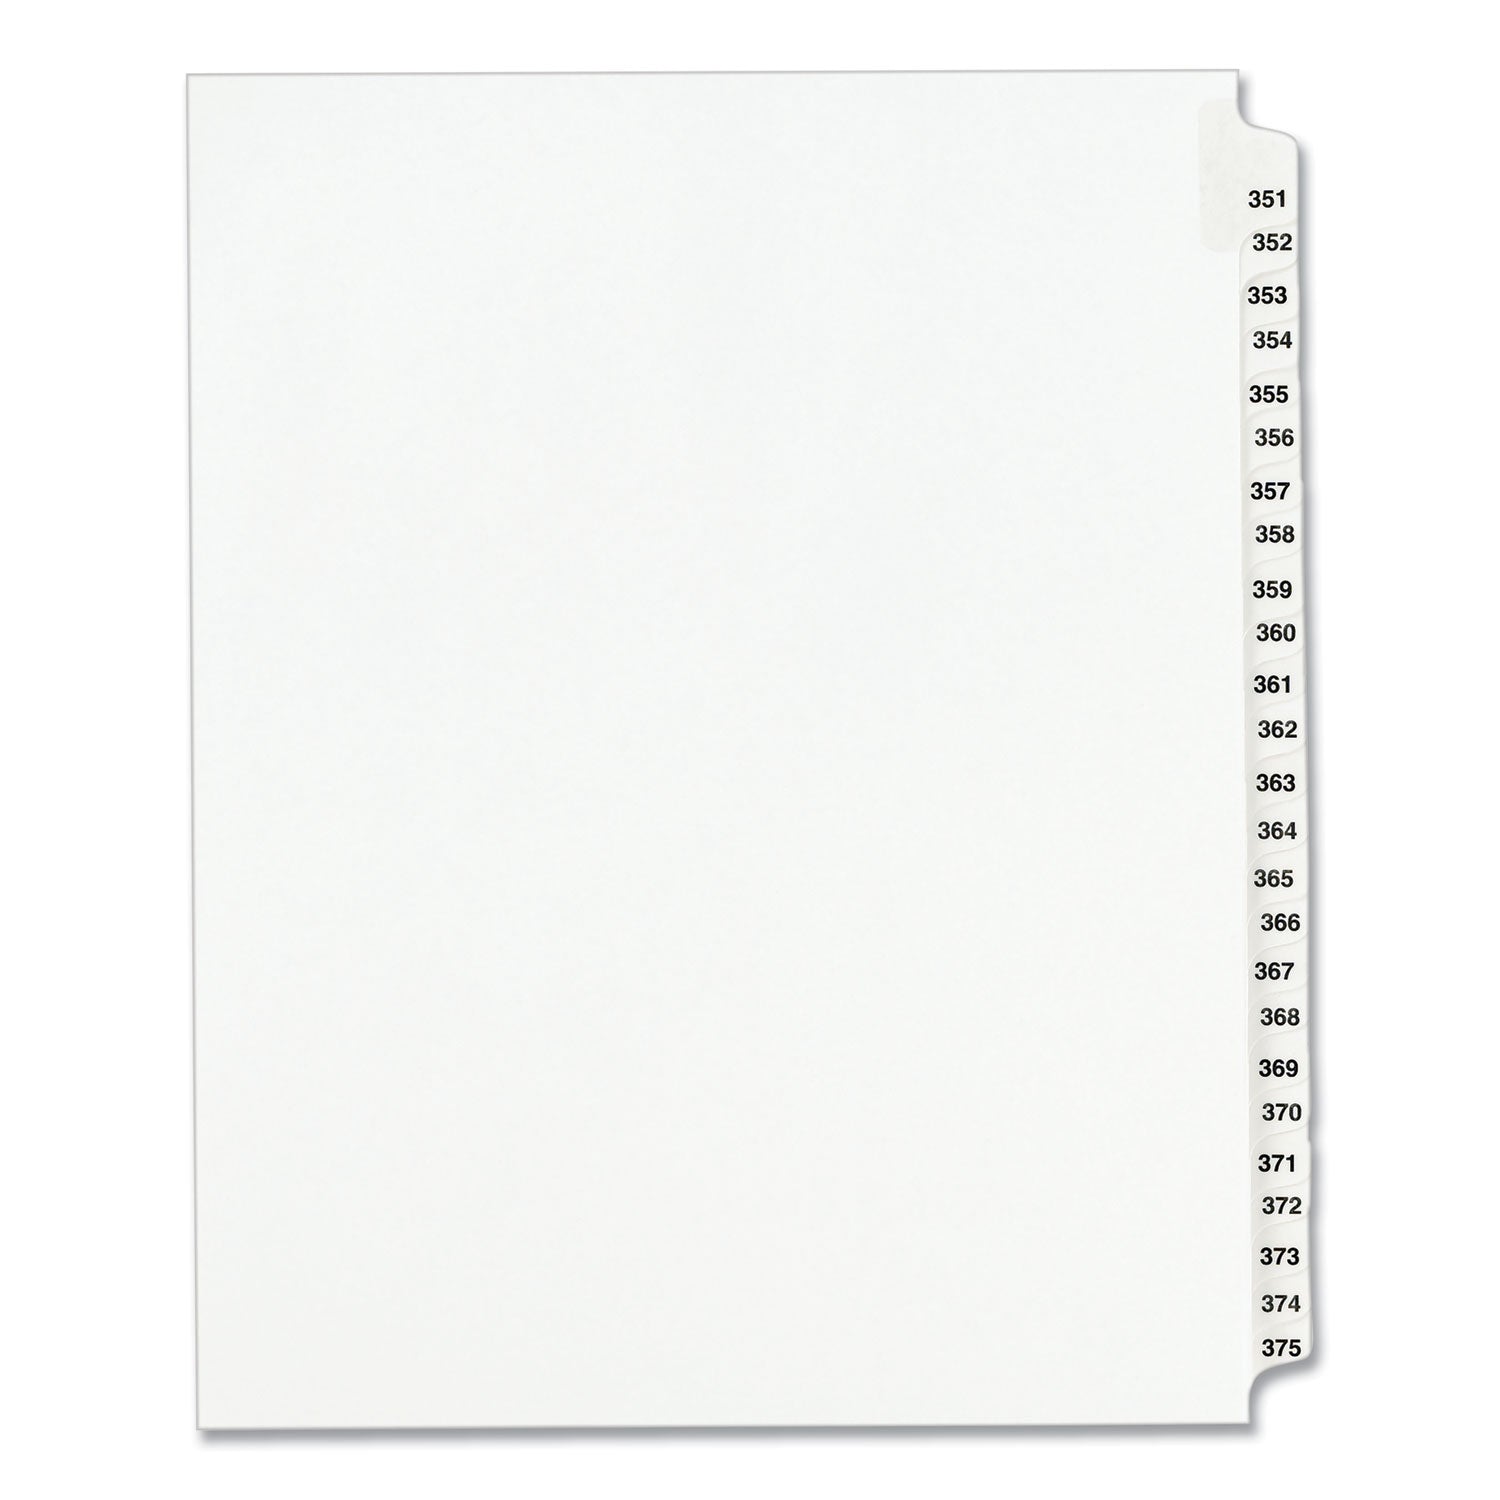 Preprinted Legal Exhibit Side Tab Index Dividers, Avery Style, 25-Tab, 351 to 375, 11 x 8.5, White, 1 Set, (1344) - 